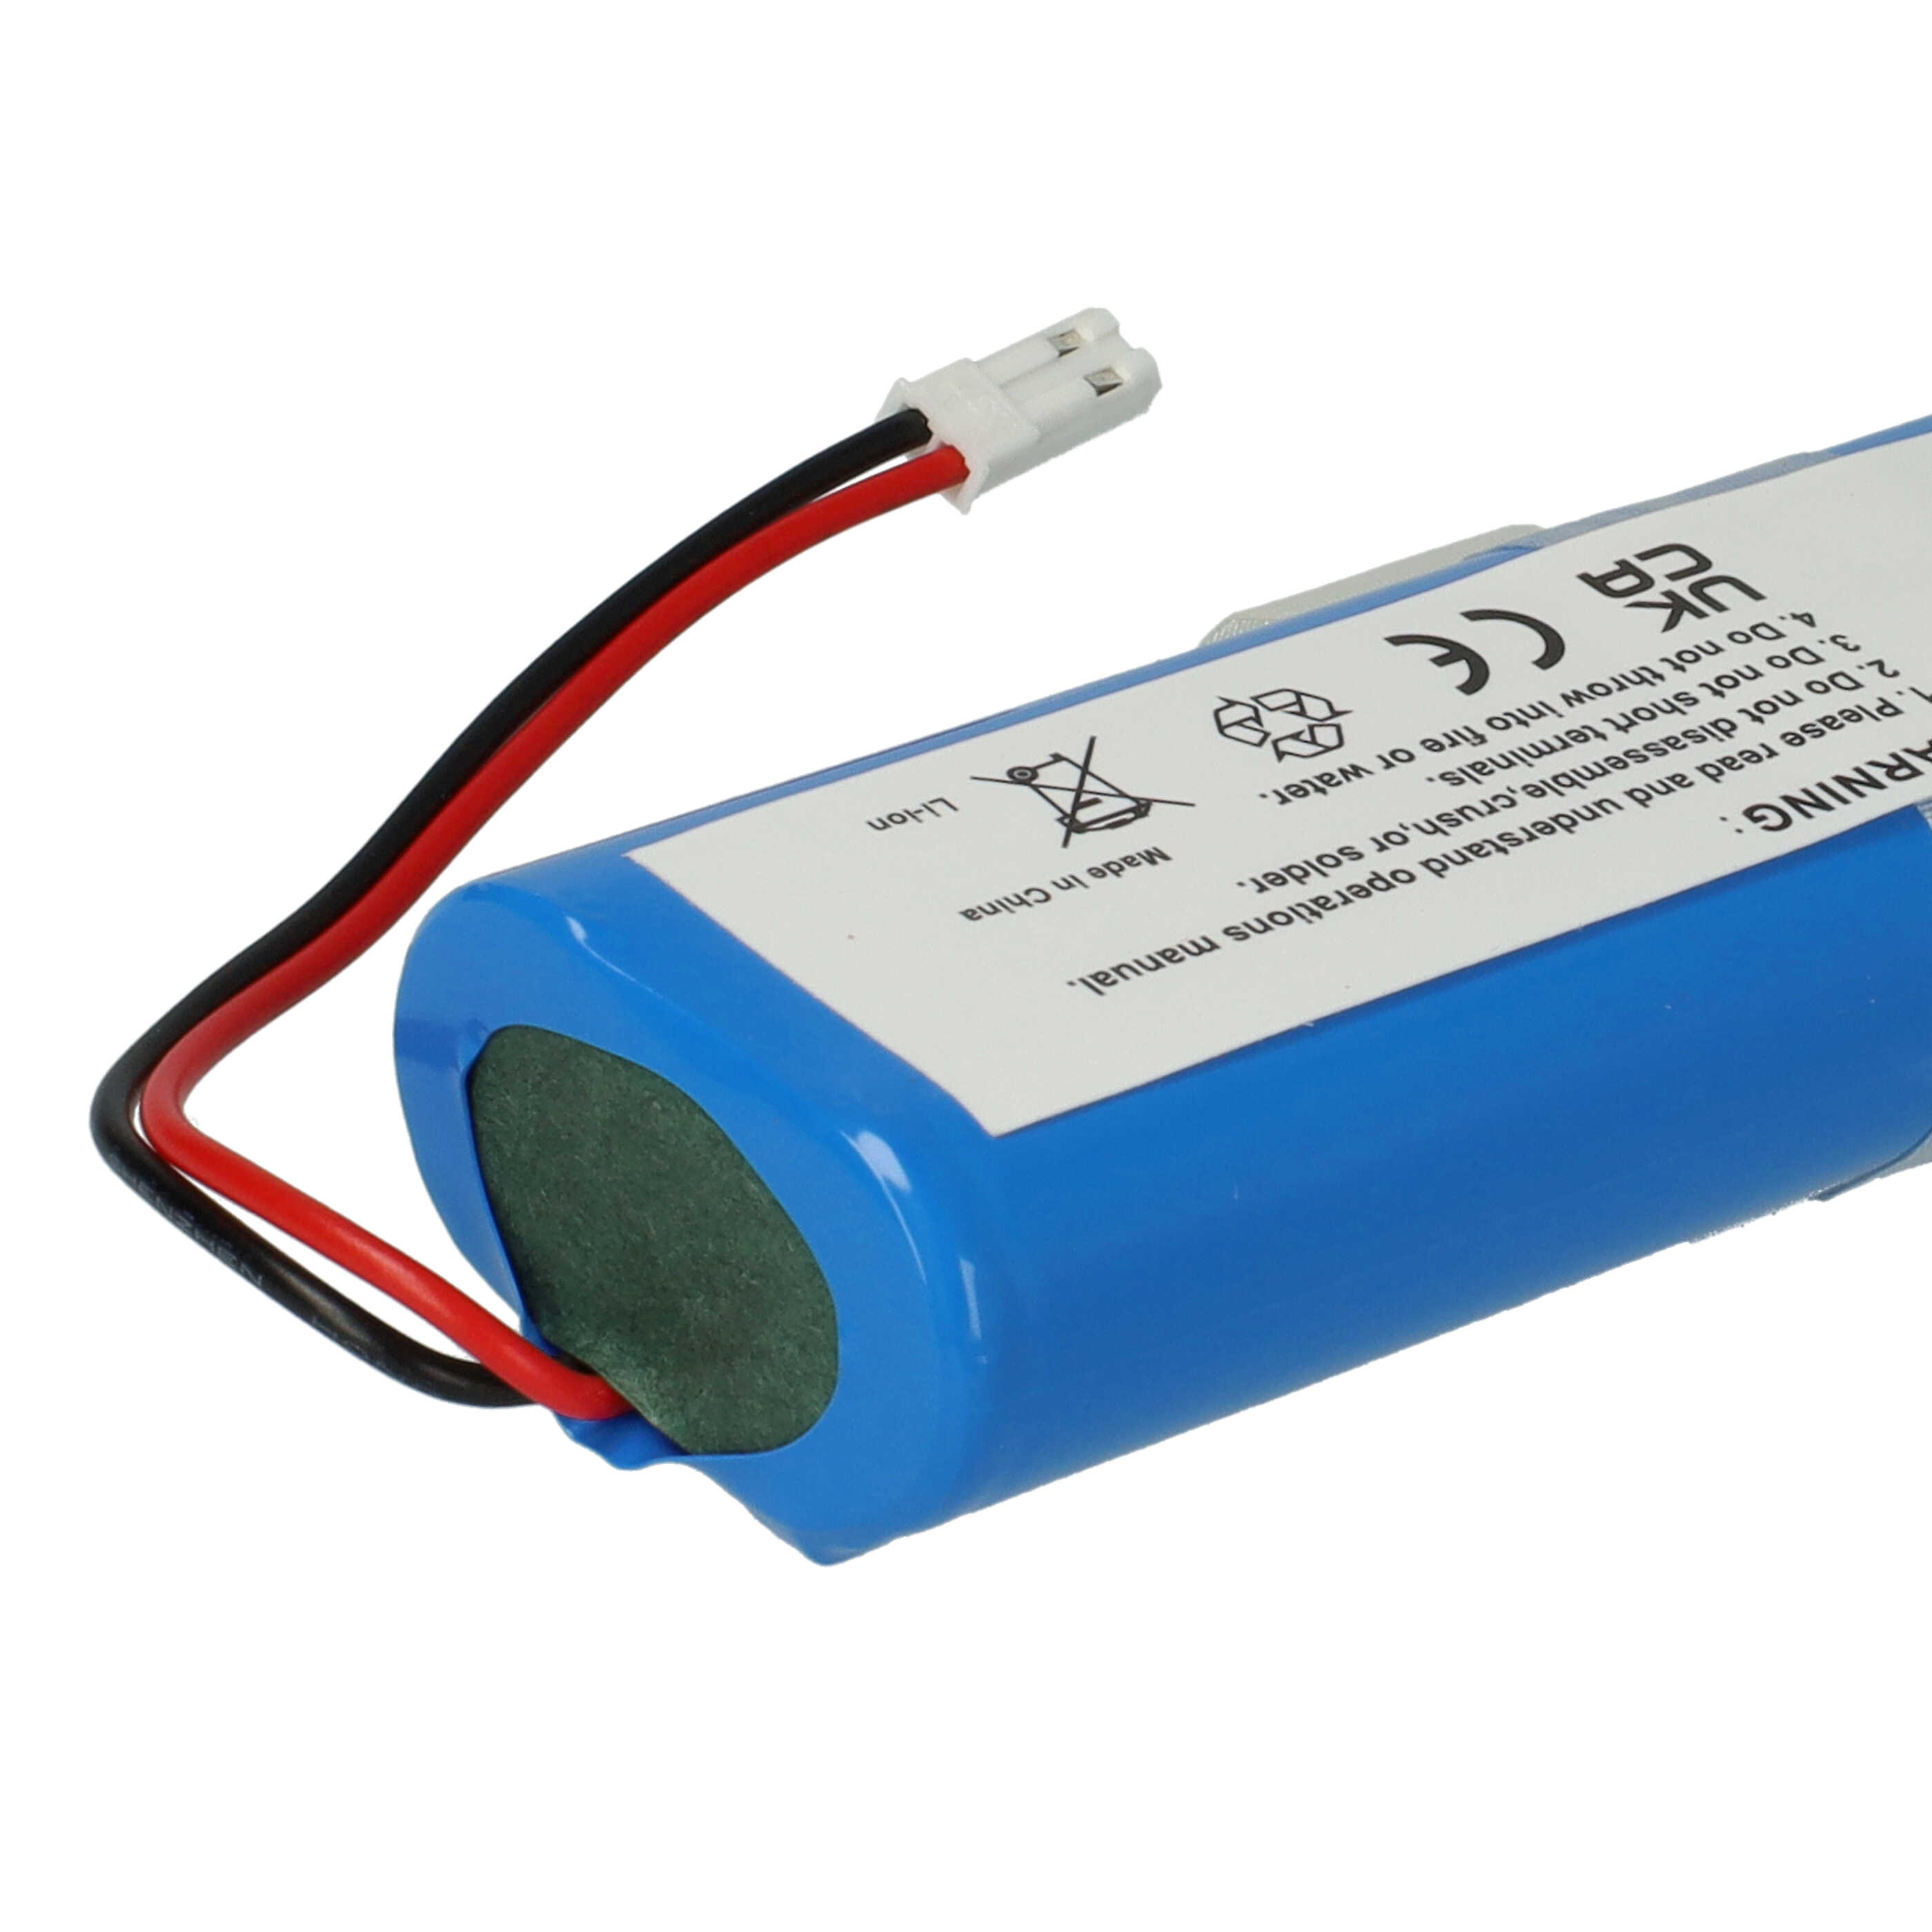 Battery Replacement for iLife Ay-18650B4, 18650B4-4S1P-AGX-2, SUN-INTE-202 for - 3400mAh, 14.4V, Li-Ion